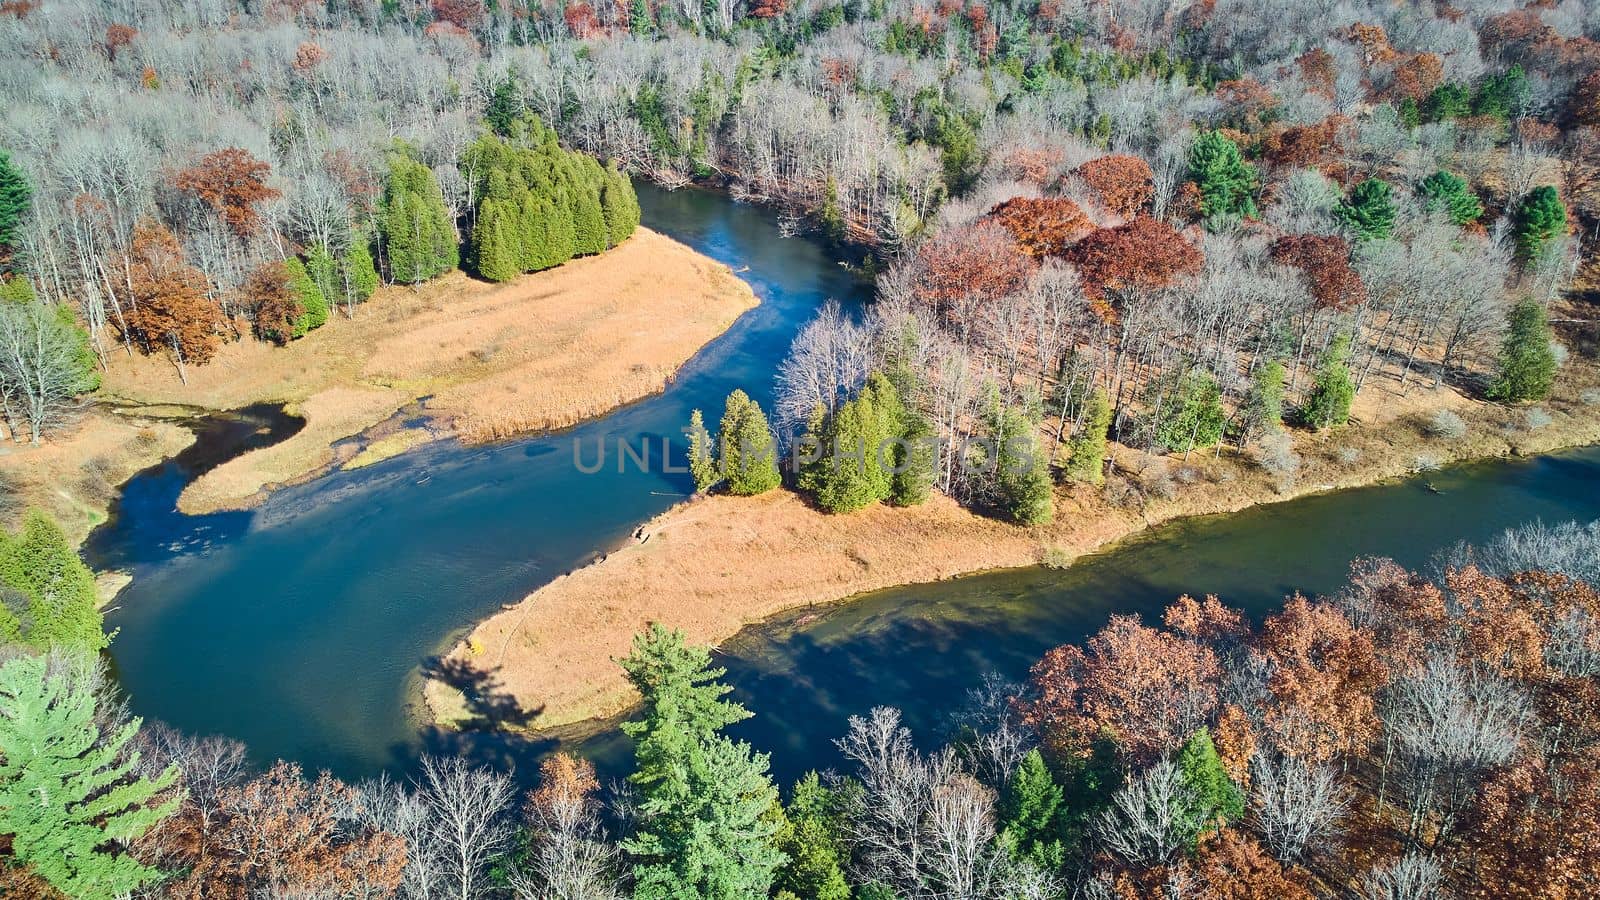 Winding river does 180 twist in late fall from aerial view by njproductions